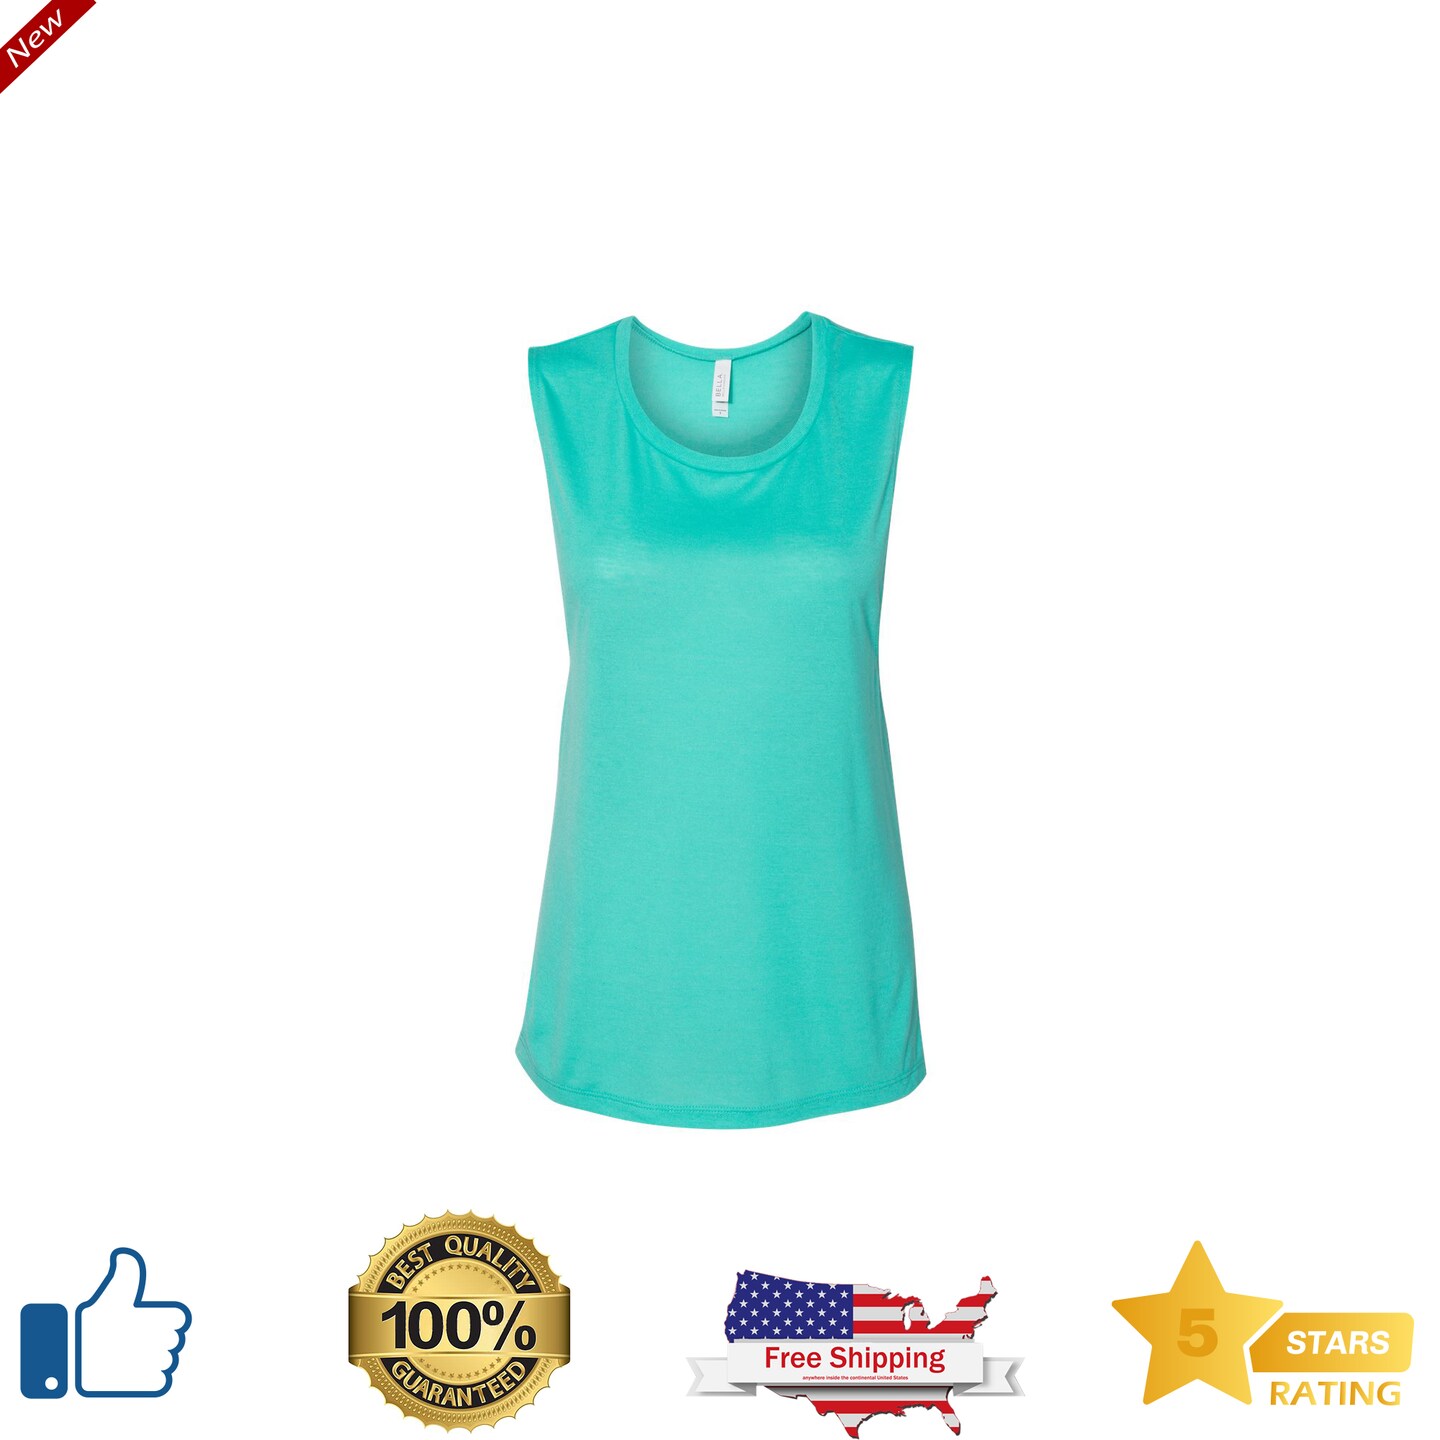 What is Super Soft Comfy Gym Fitness Outfit Yoga Top with